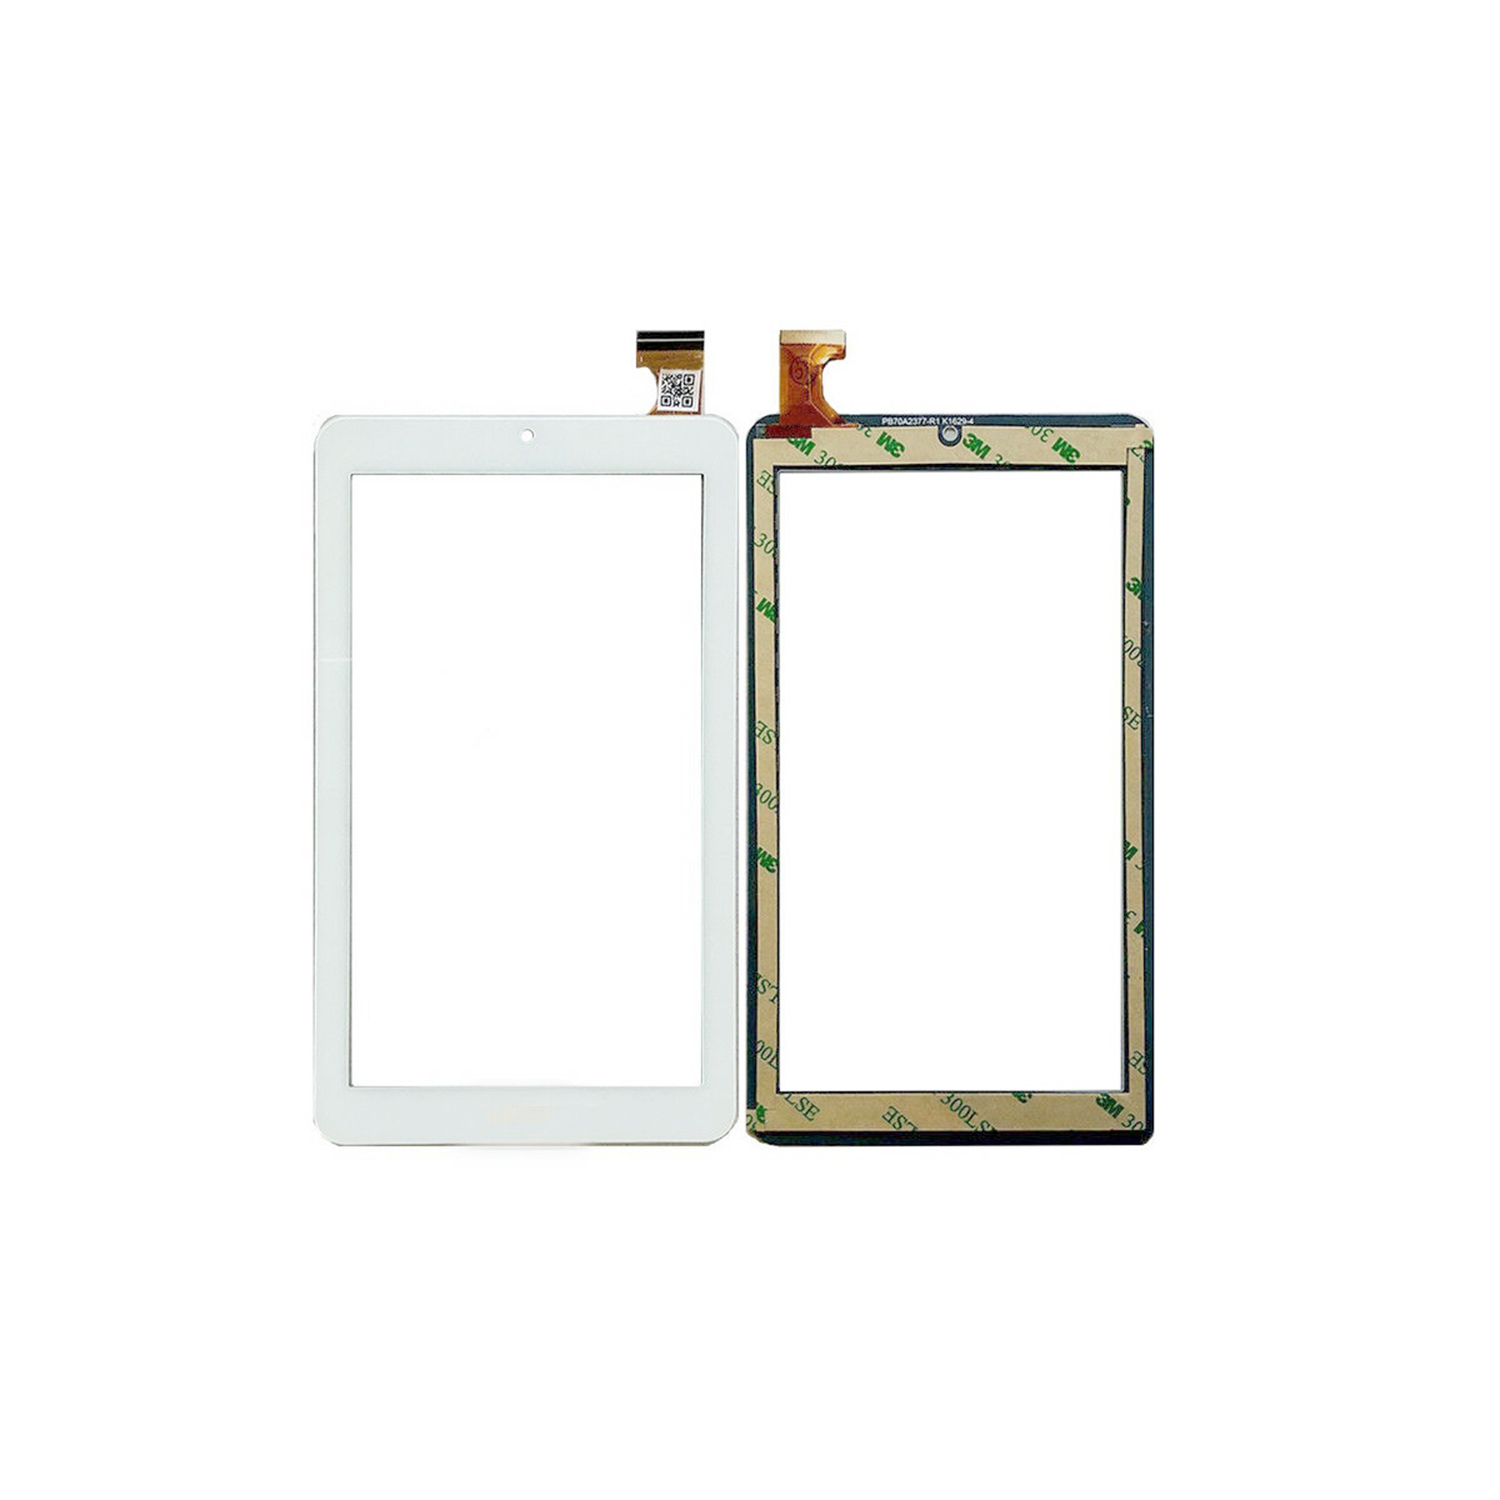 Replacement Touch Screen Digitizer Panel Compatible With Acer Iconia One 7 B1-780 A6004 - White